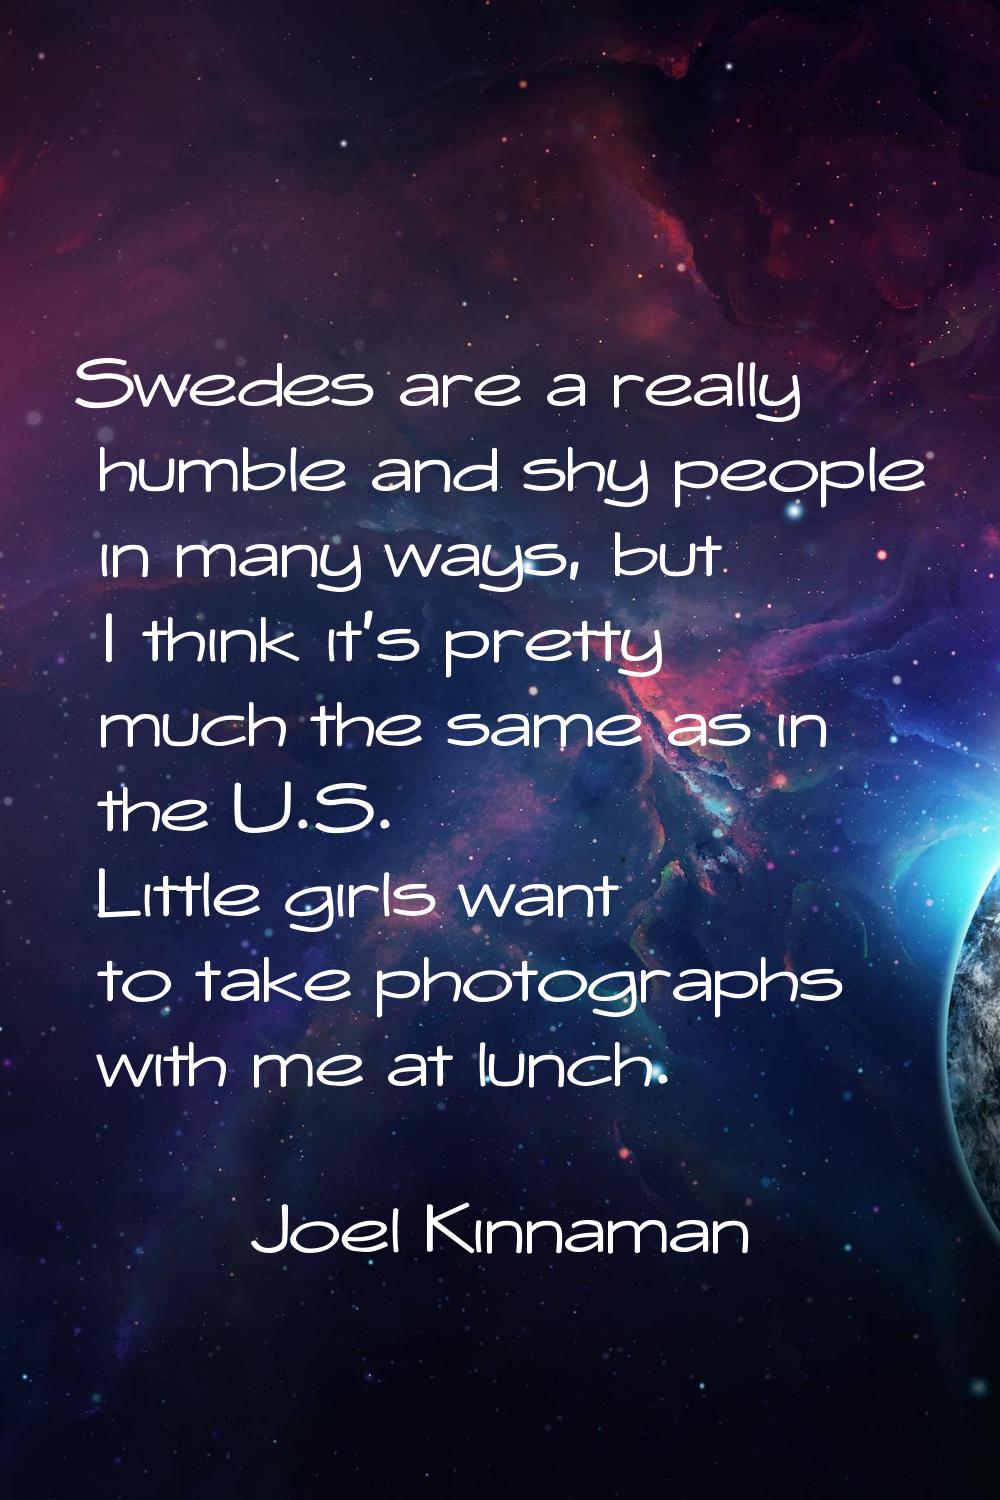 Swedes are a really humble and shy people in many ways, but I think it's pretty much the same as in